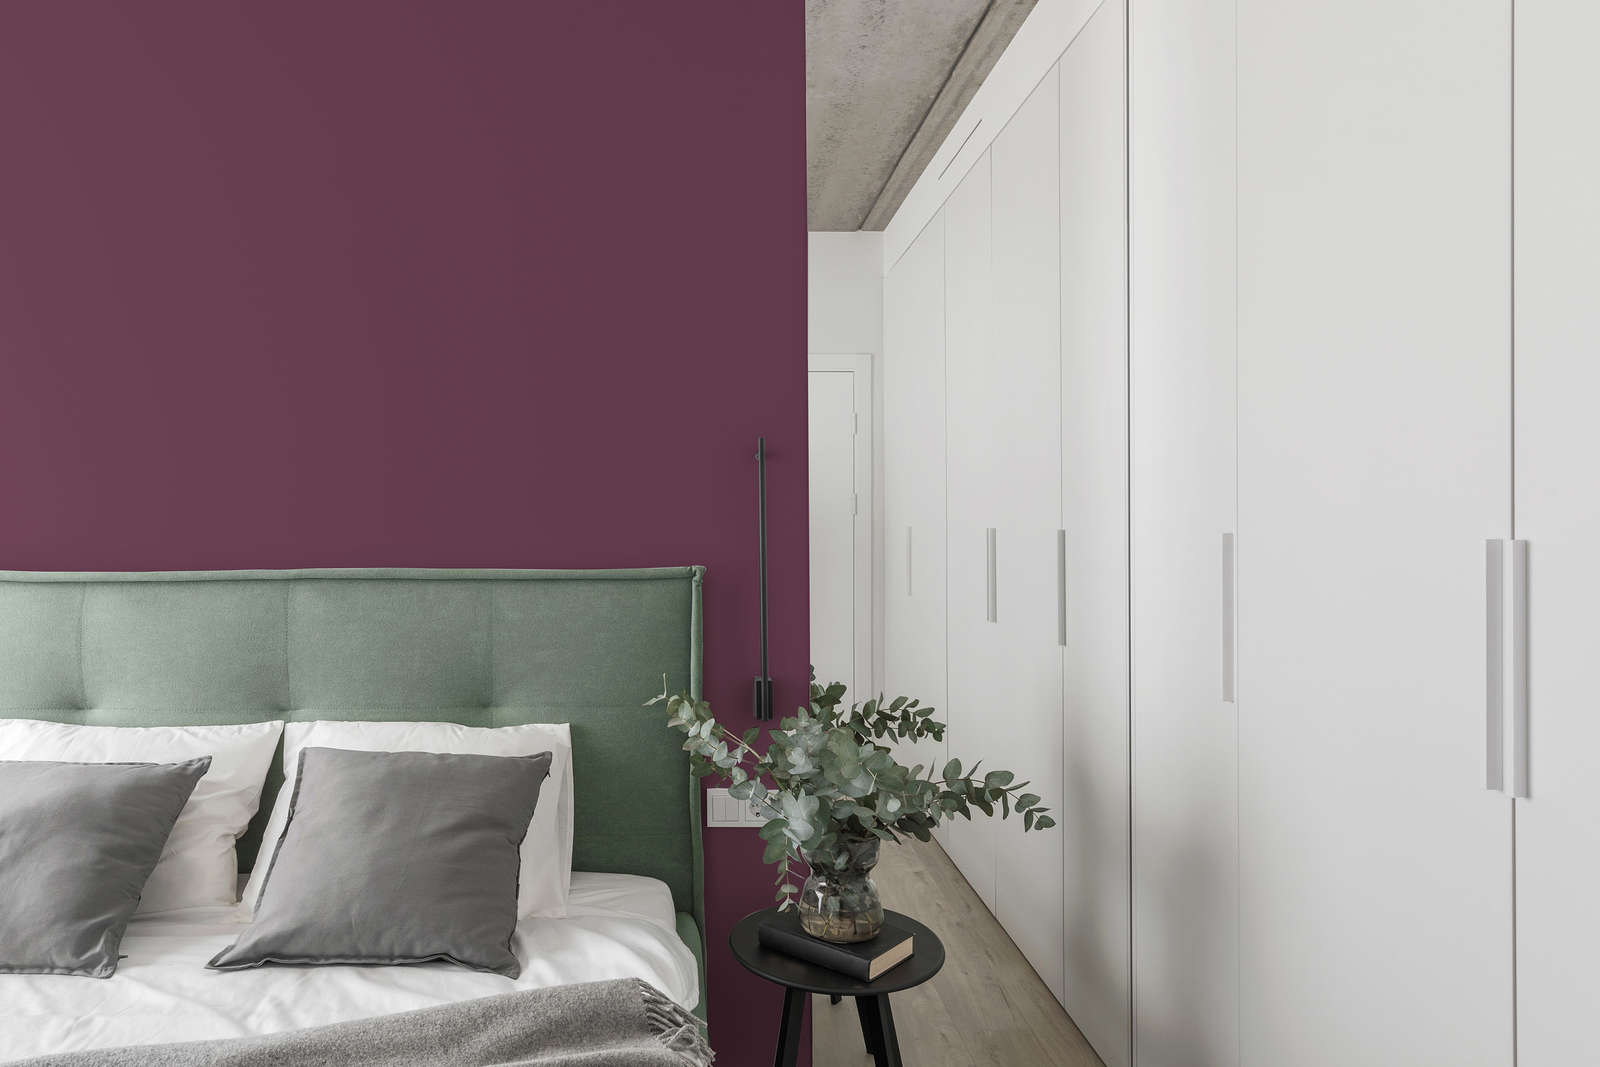             Premium Wall Paint strong berry »Beautiful Berry« NW212 – 1 litre
        